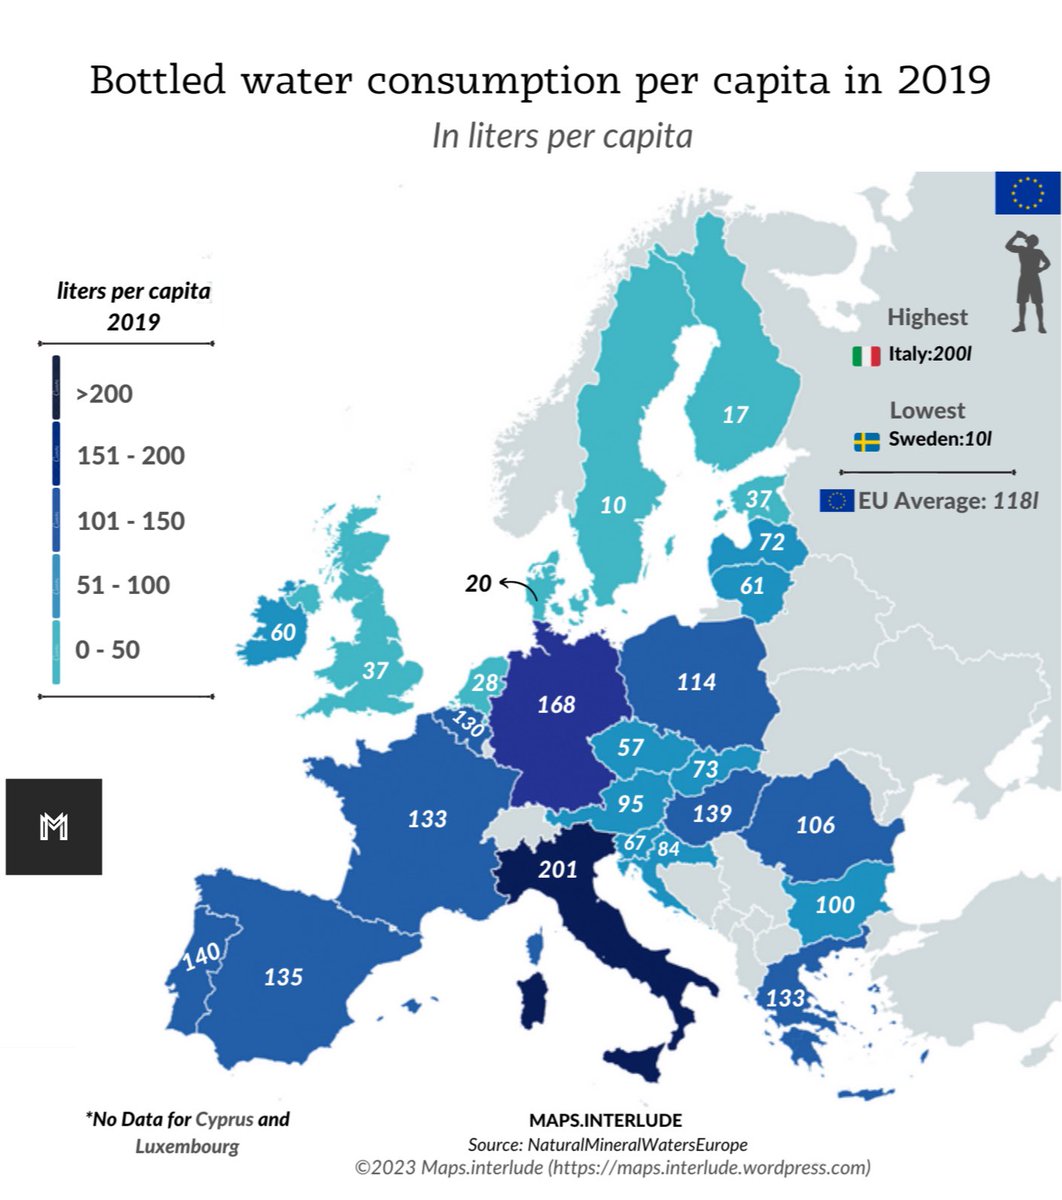 Bottled water consumption per capita in 2019 
~
Highest:🇮🇹Italy 200l 
•
Lowest: 🇸🇪Sweden 10l 
•
#maps #waterconsumption #drinkwater #dataviz #geospatial